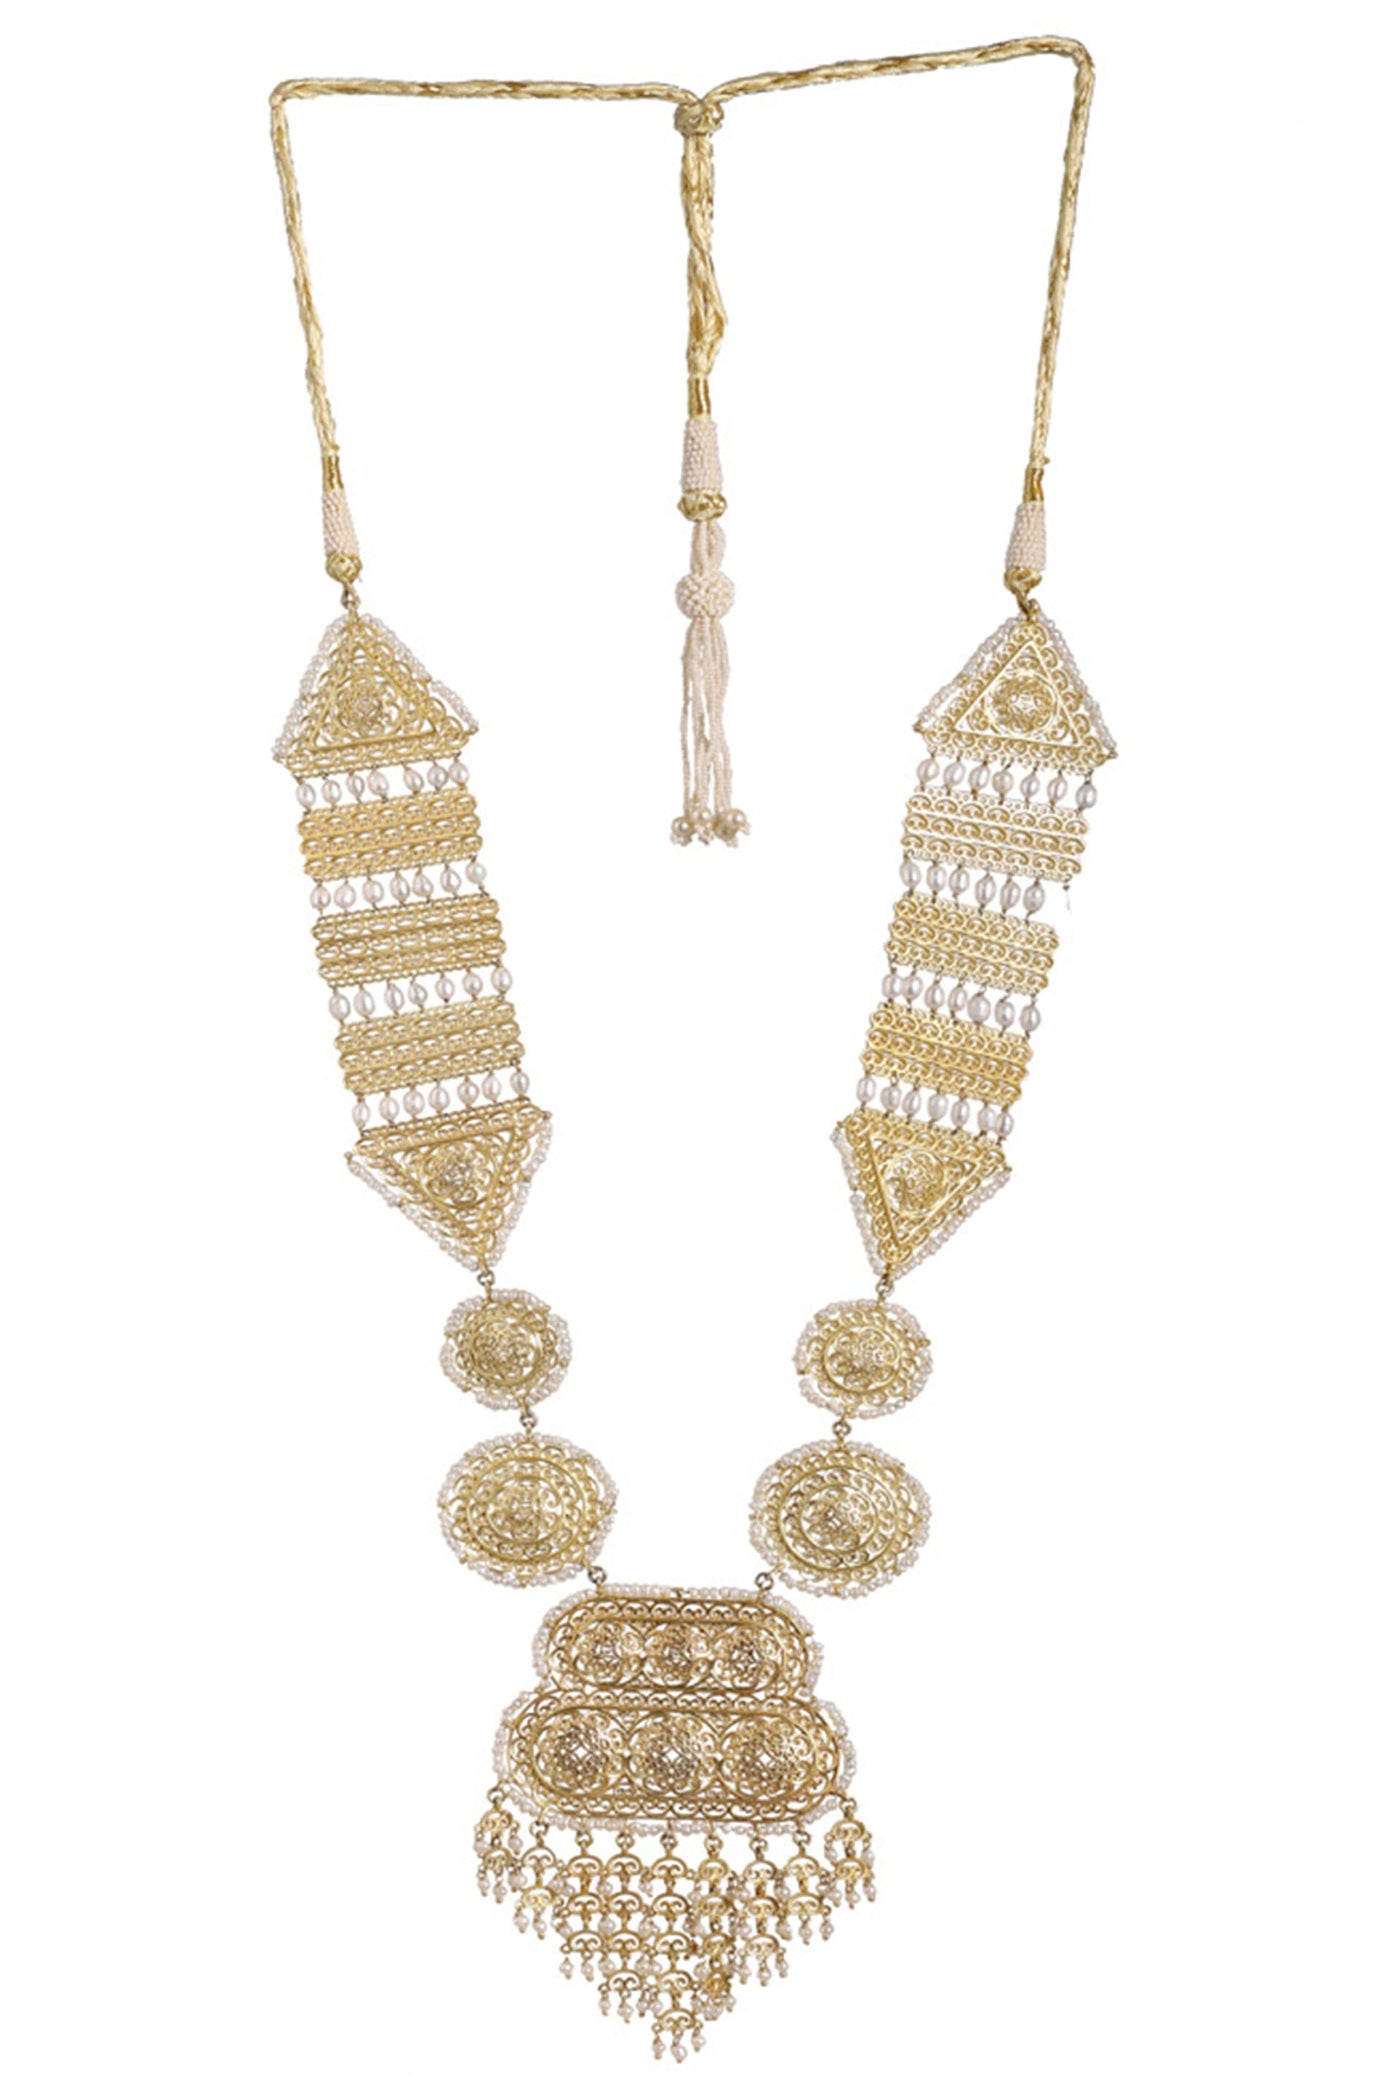 Zariin 22kt Gold Plated Handcrafted White Fresh Water Pearls With Filigree Work Traditional Raani Haar Necklace festive indian designer fashion jewellery online shopping melange singapore